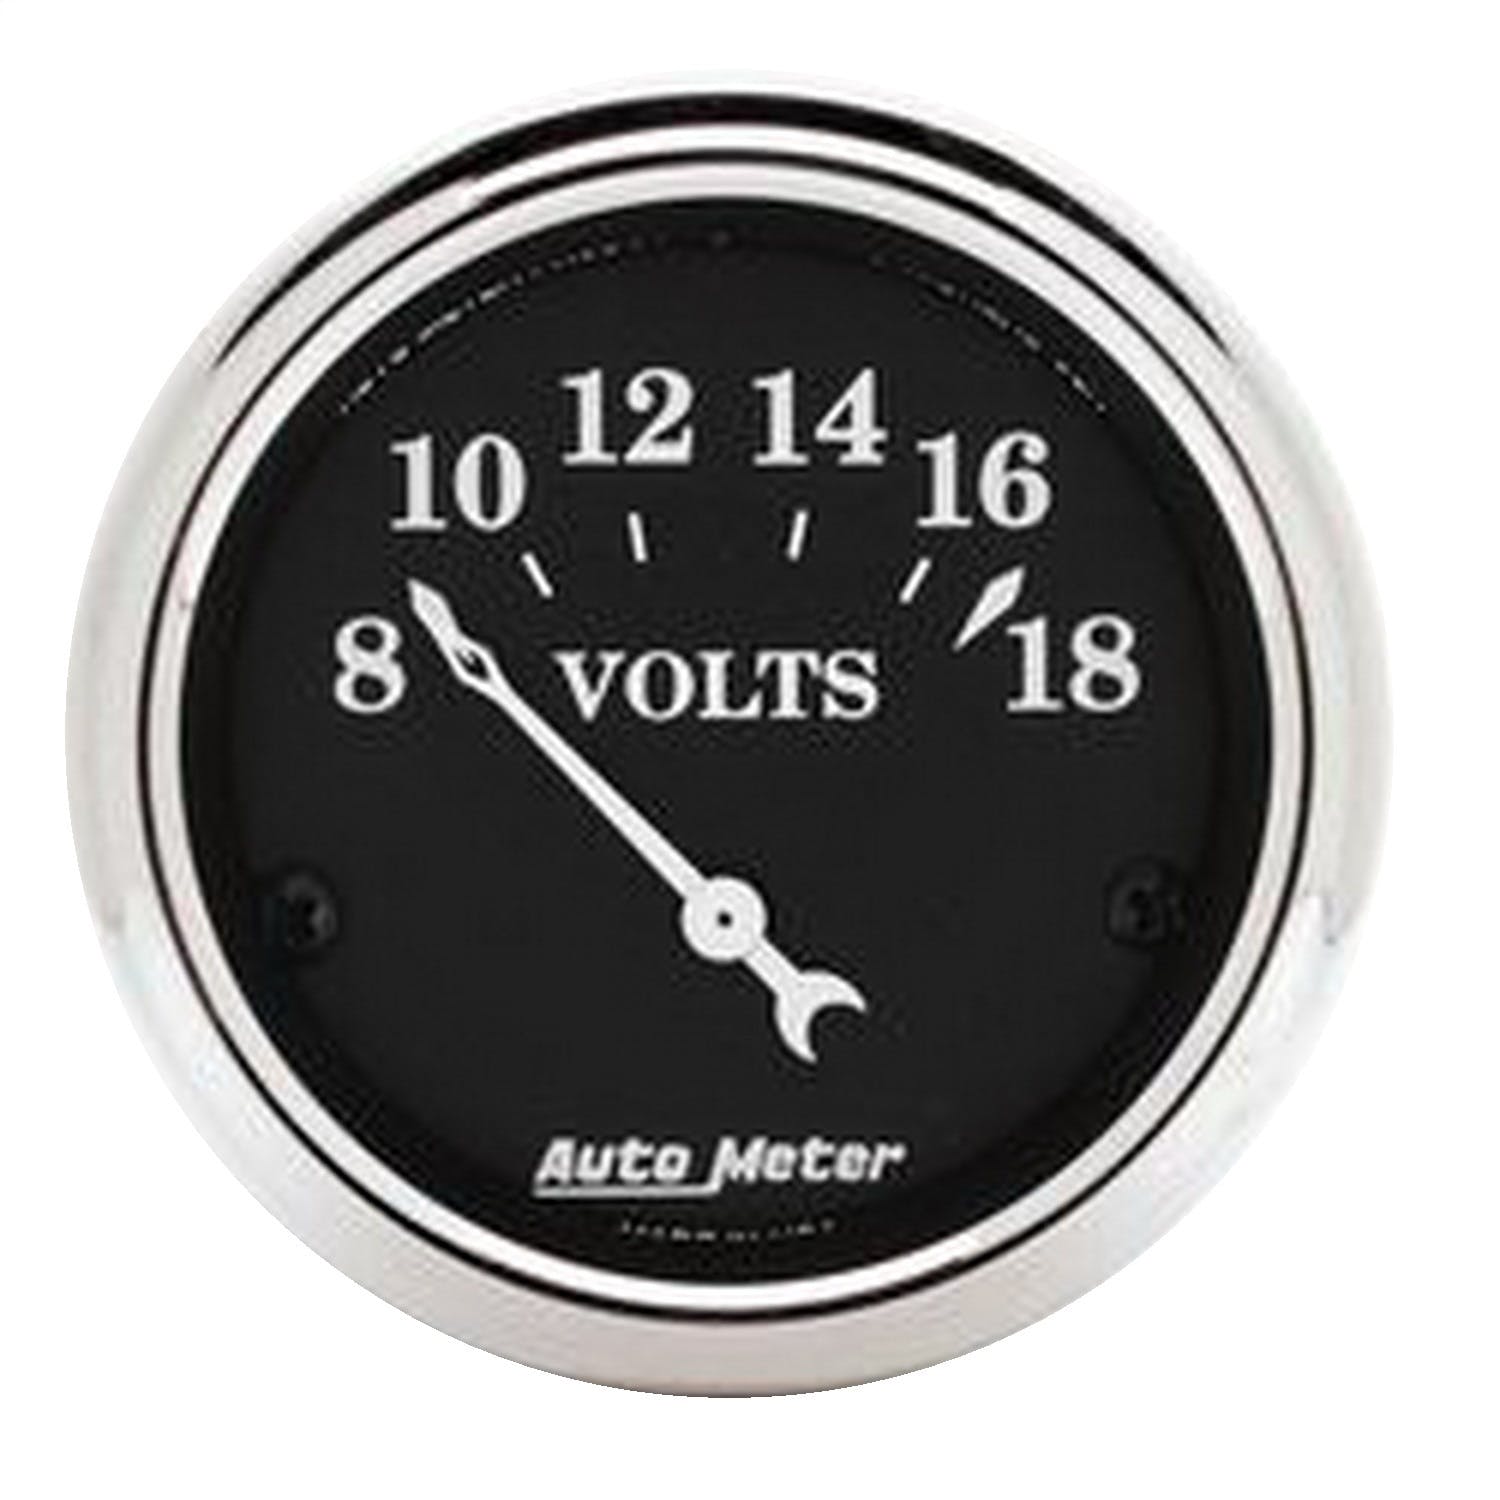 AutoMeter Products 1791 Voltmeter 8-18 Volts